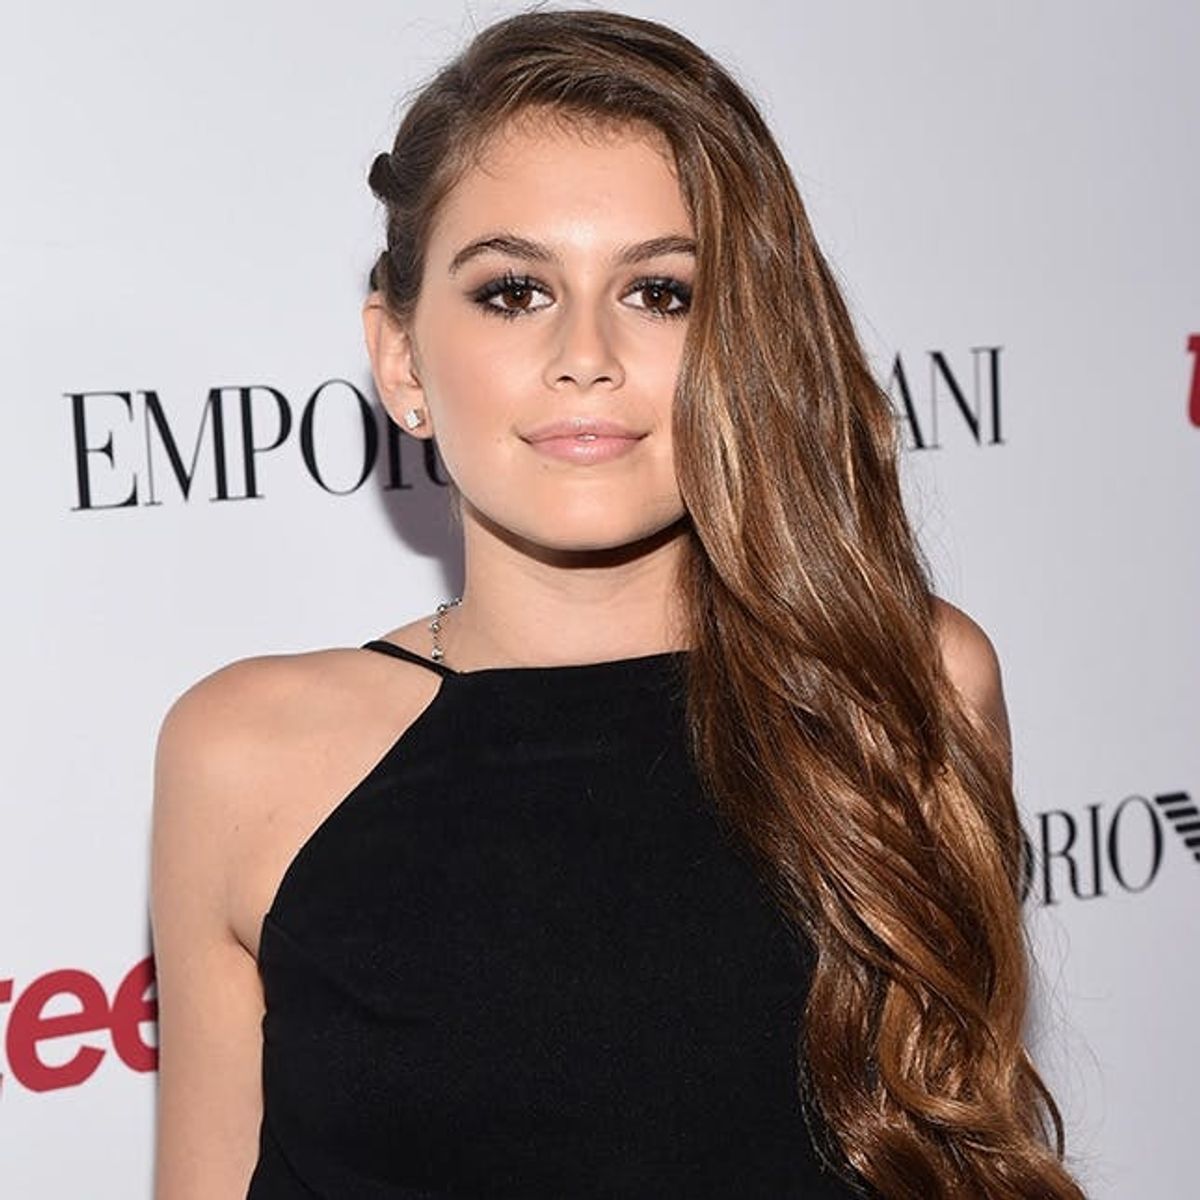 The Next Big Name in Modeling Is Cindy Crawford’s 13-Year-Old Daughter